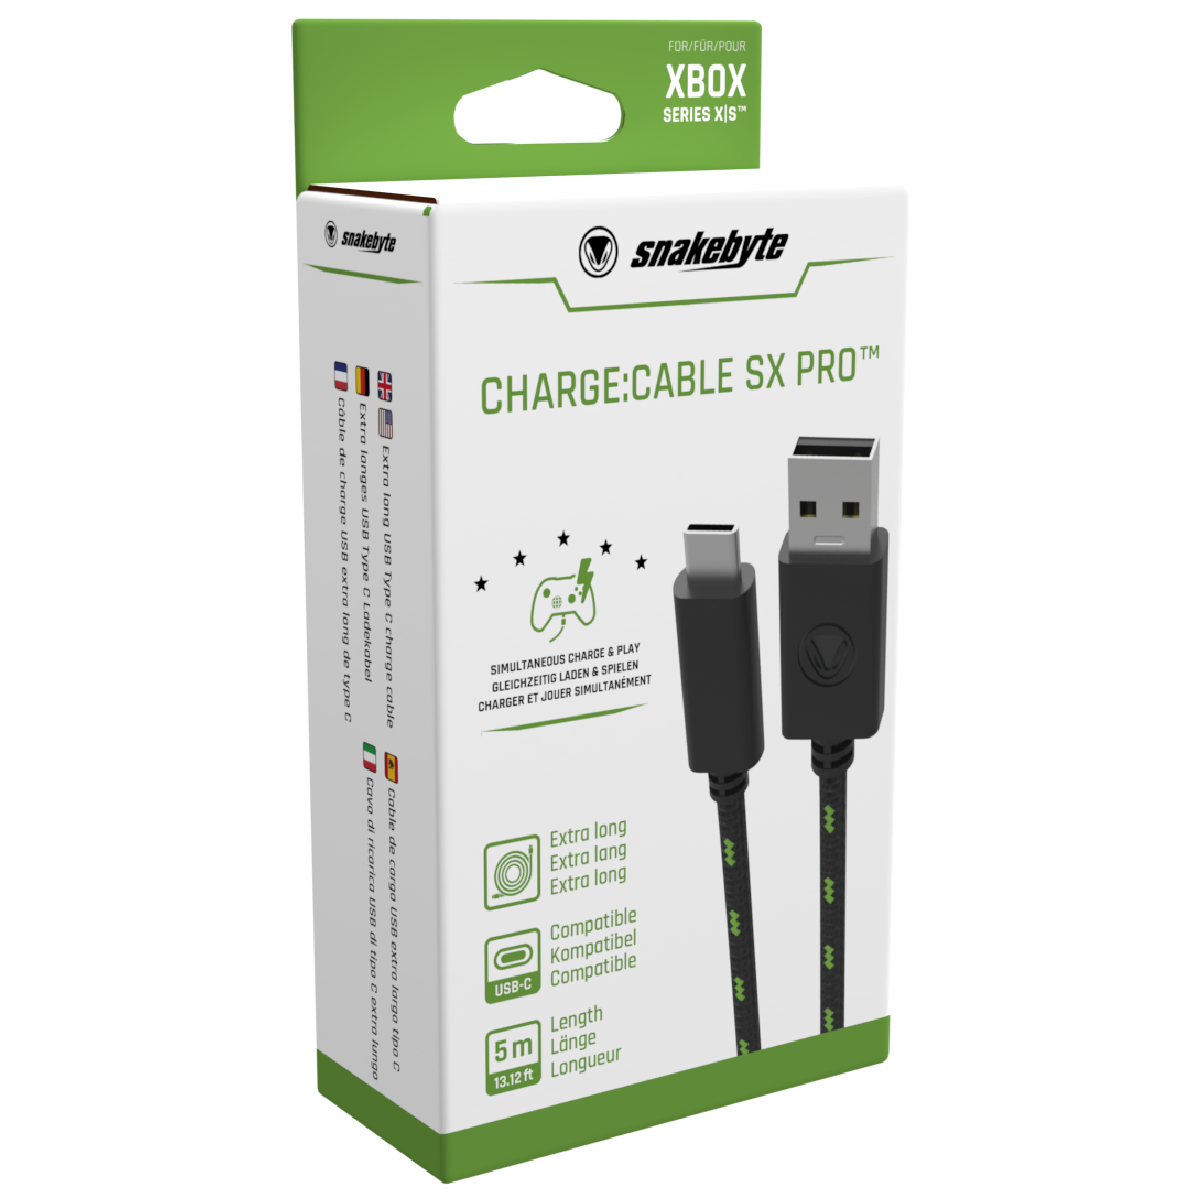 CHARGE:CABLE SX PRO